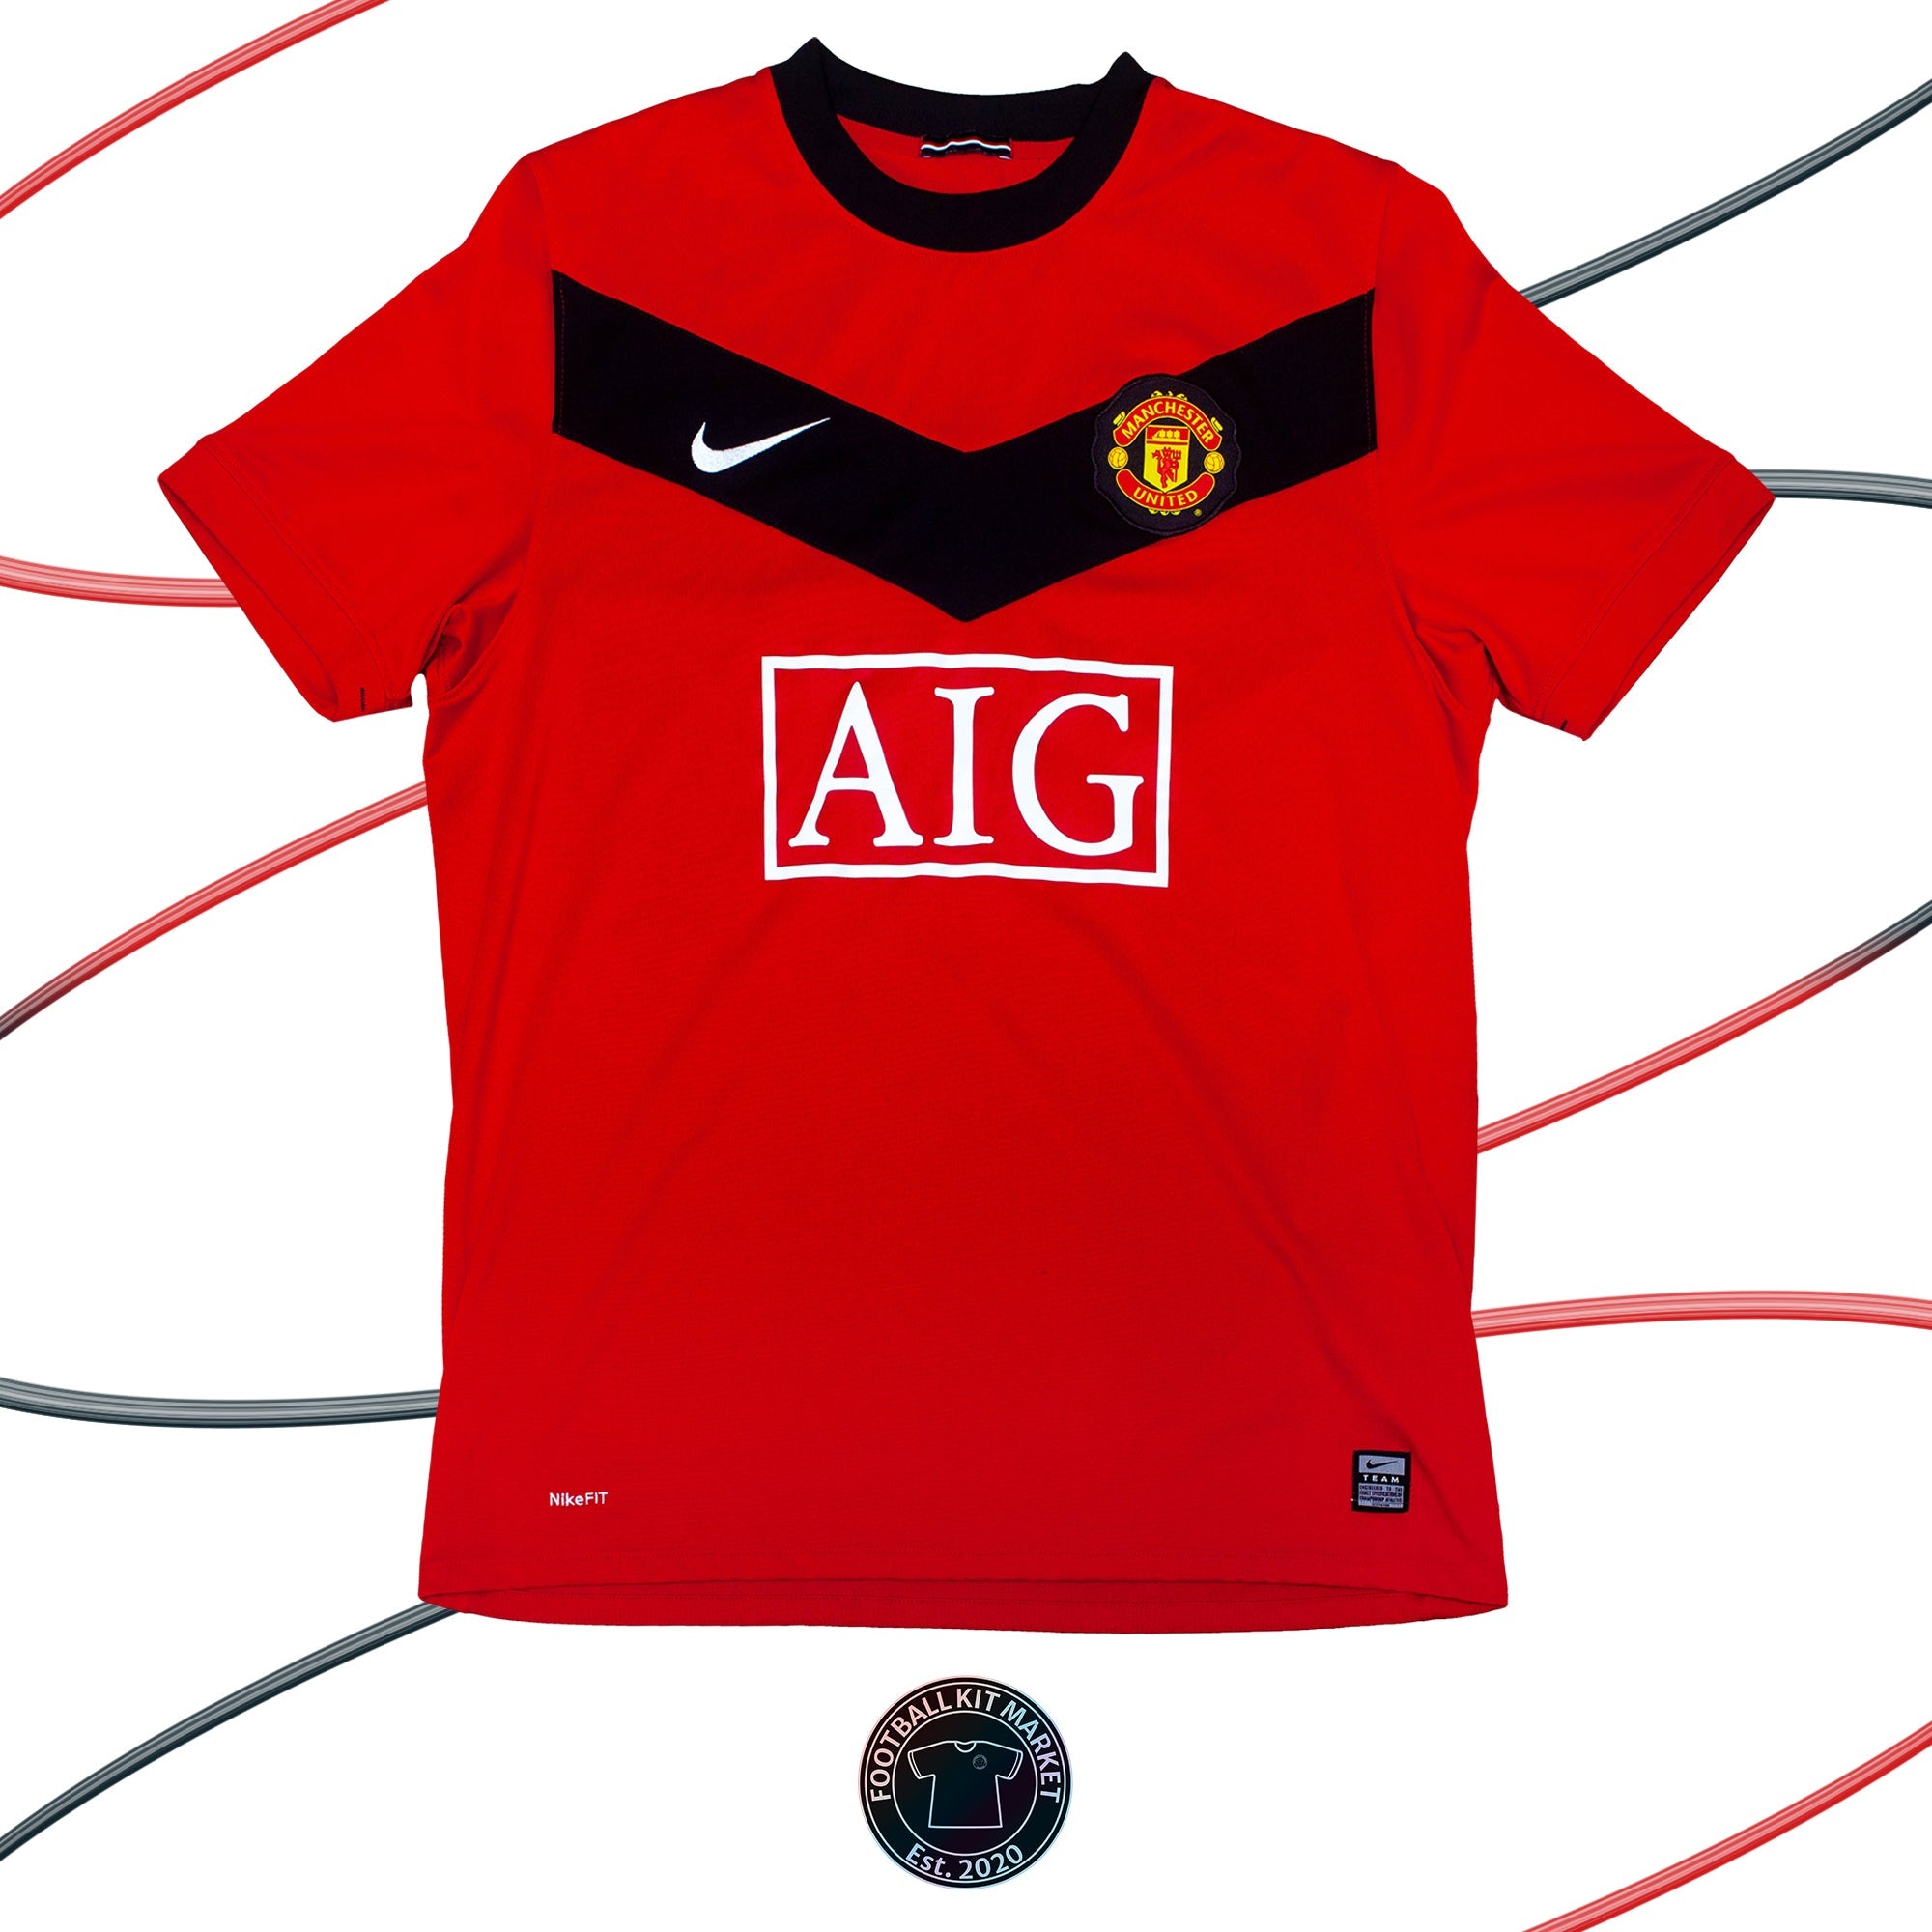 Genuine MANCHESTER UNITED Home (2009-2010) - NIKE (L) - Product Image from Football Kit Market